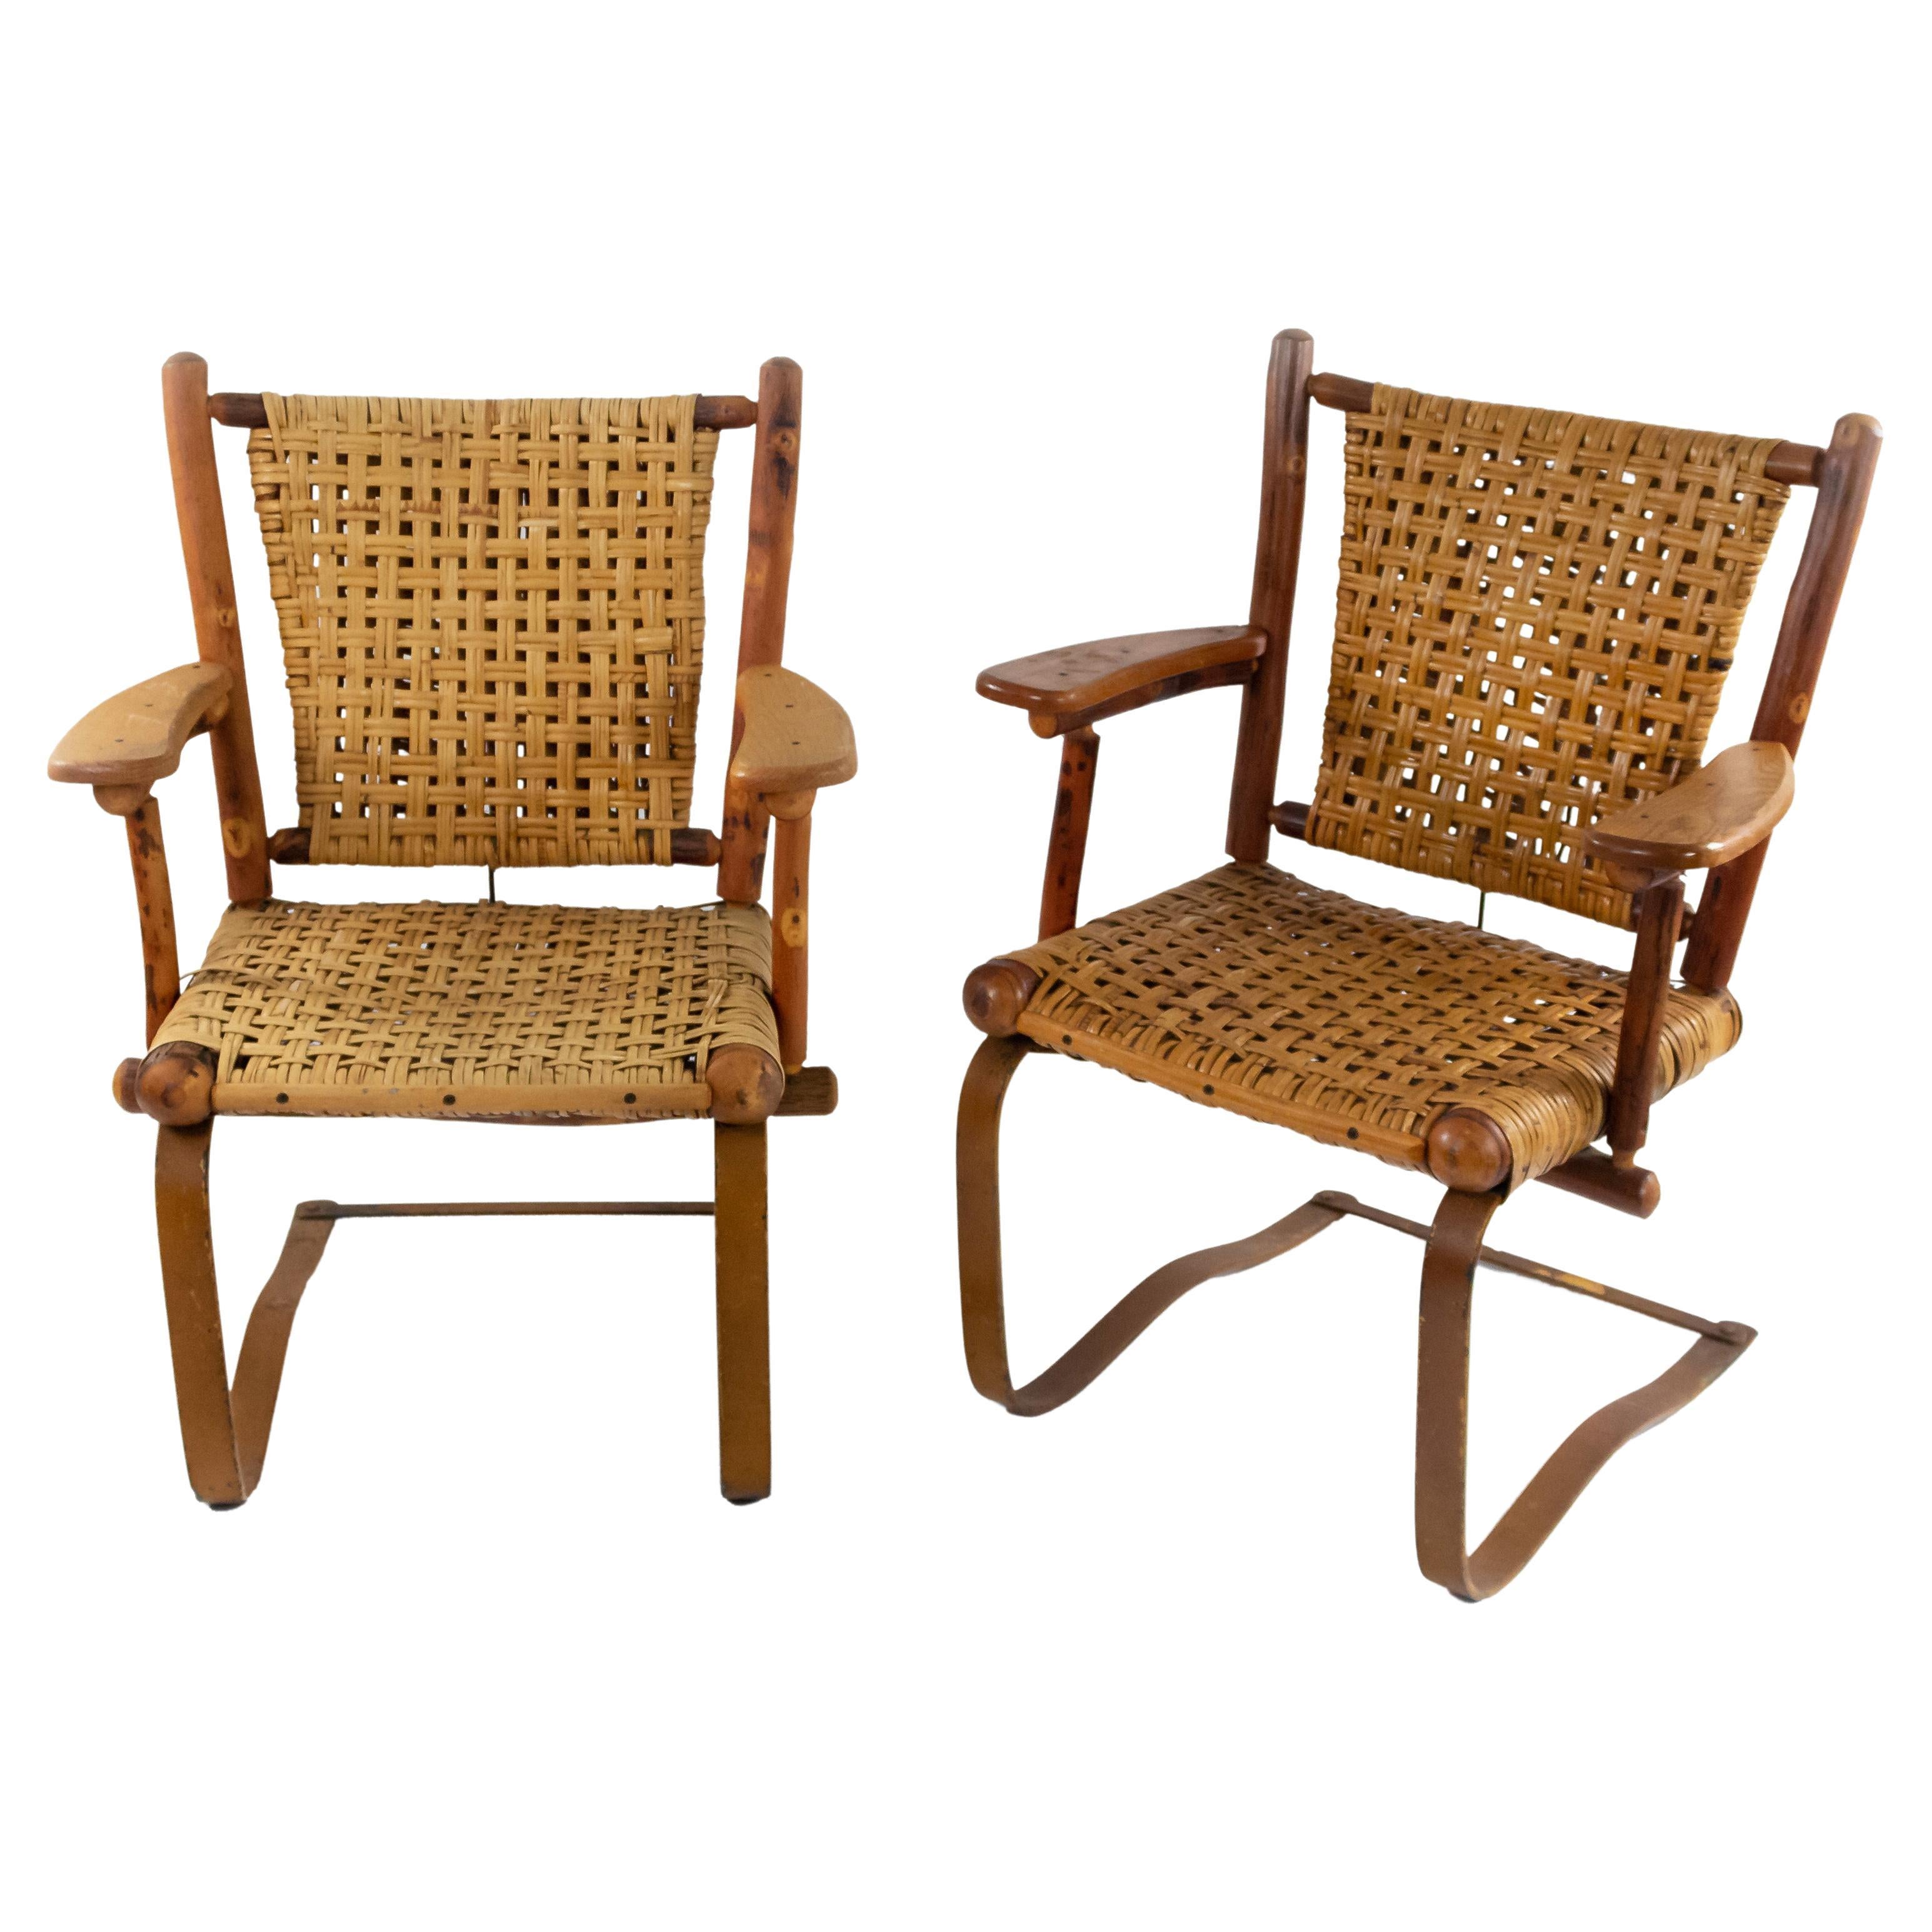 Pair of Rustic Old Hickory Bounce Chairs